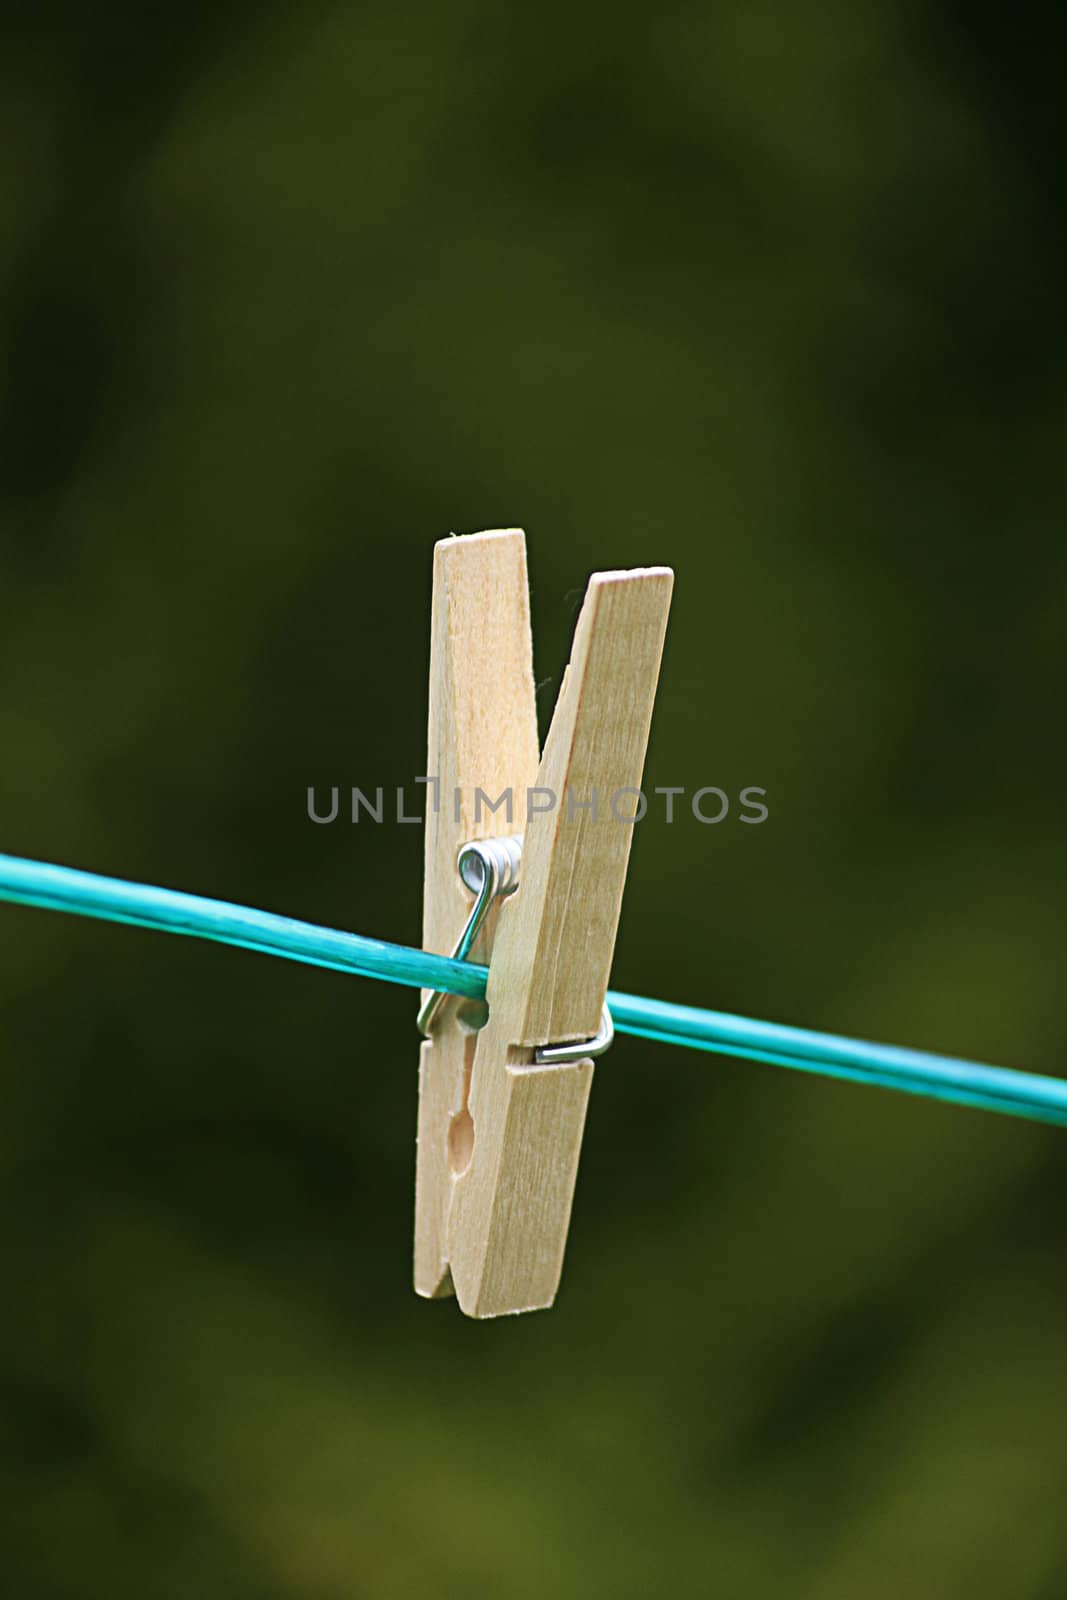 A wooden cloths peg on a green plastic washing line. Close up.